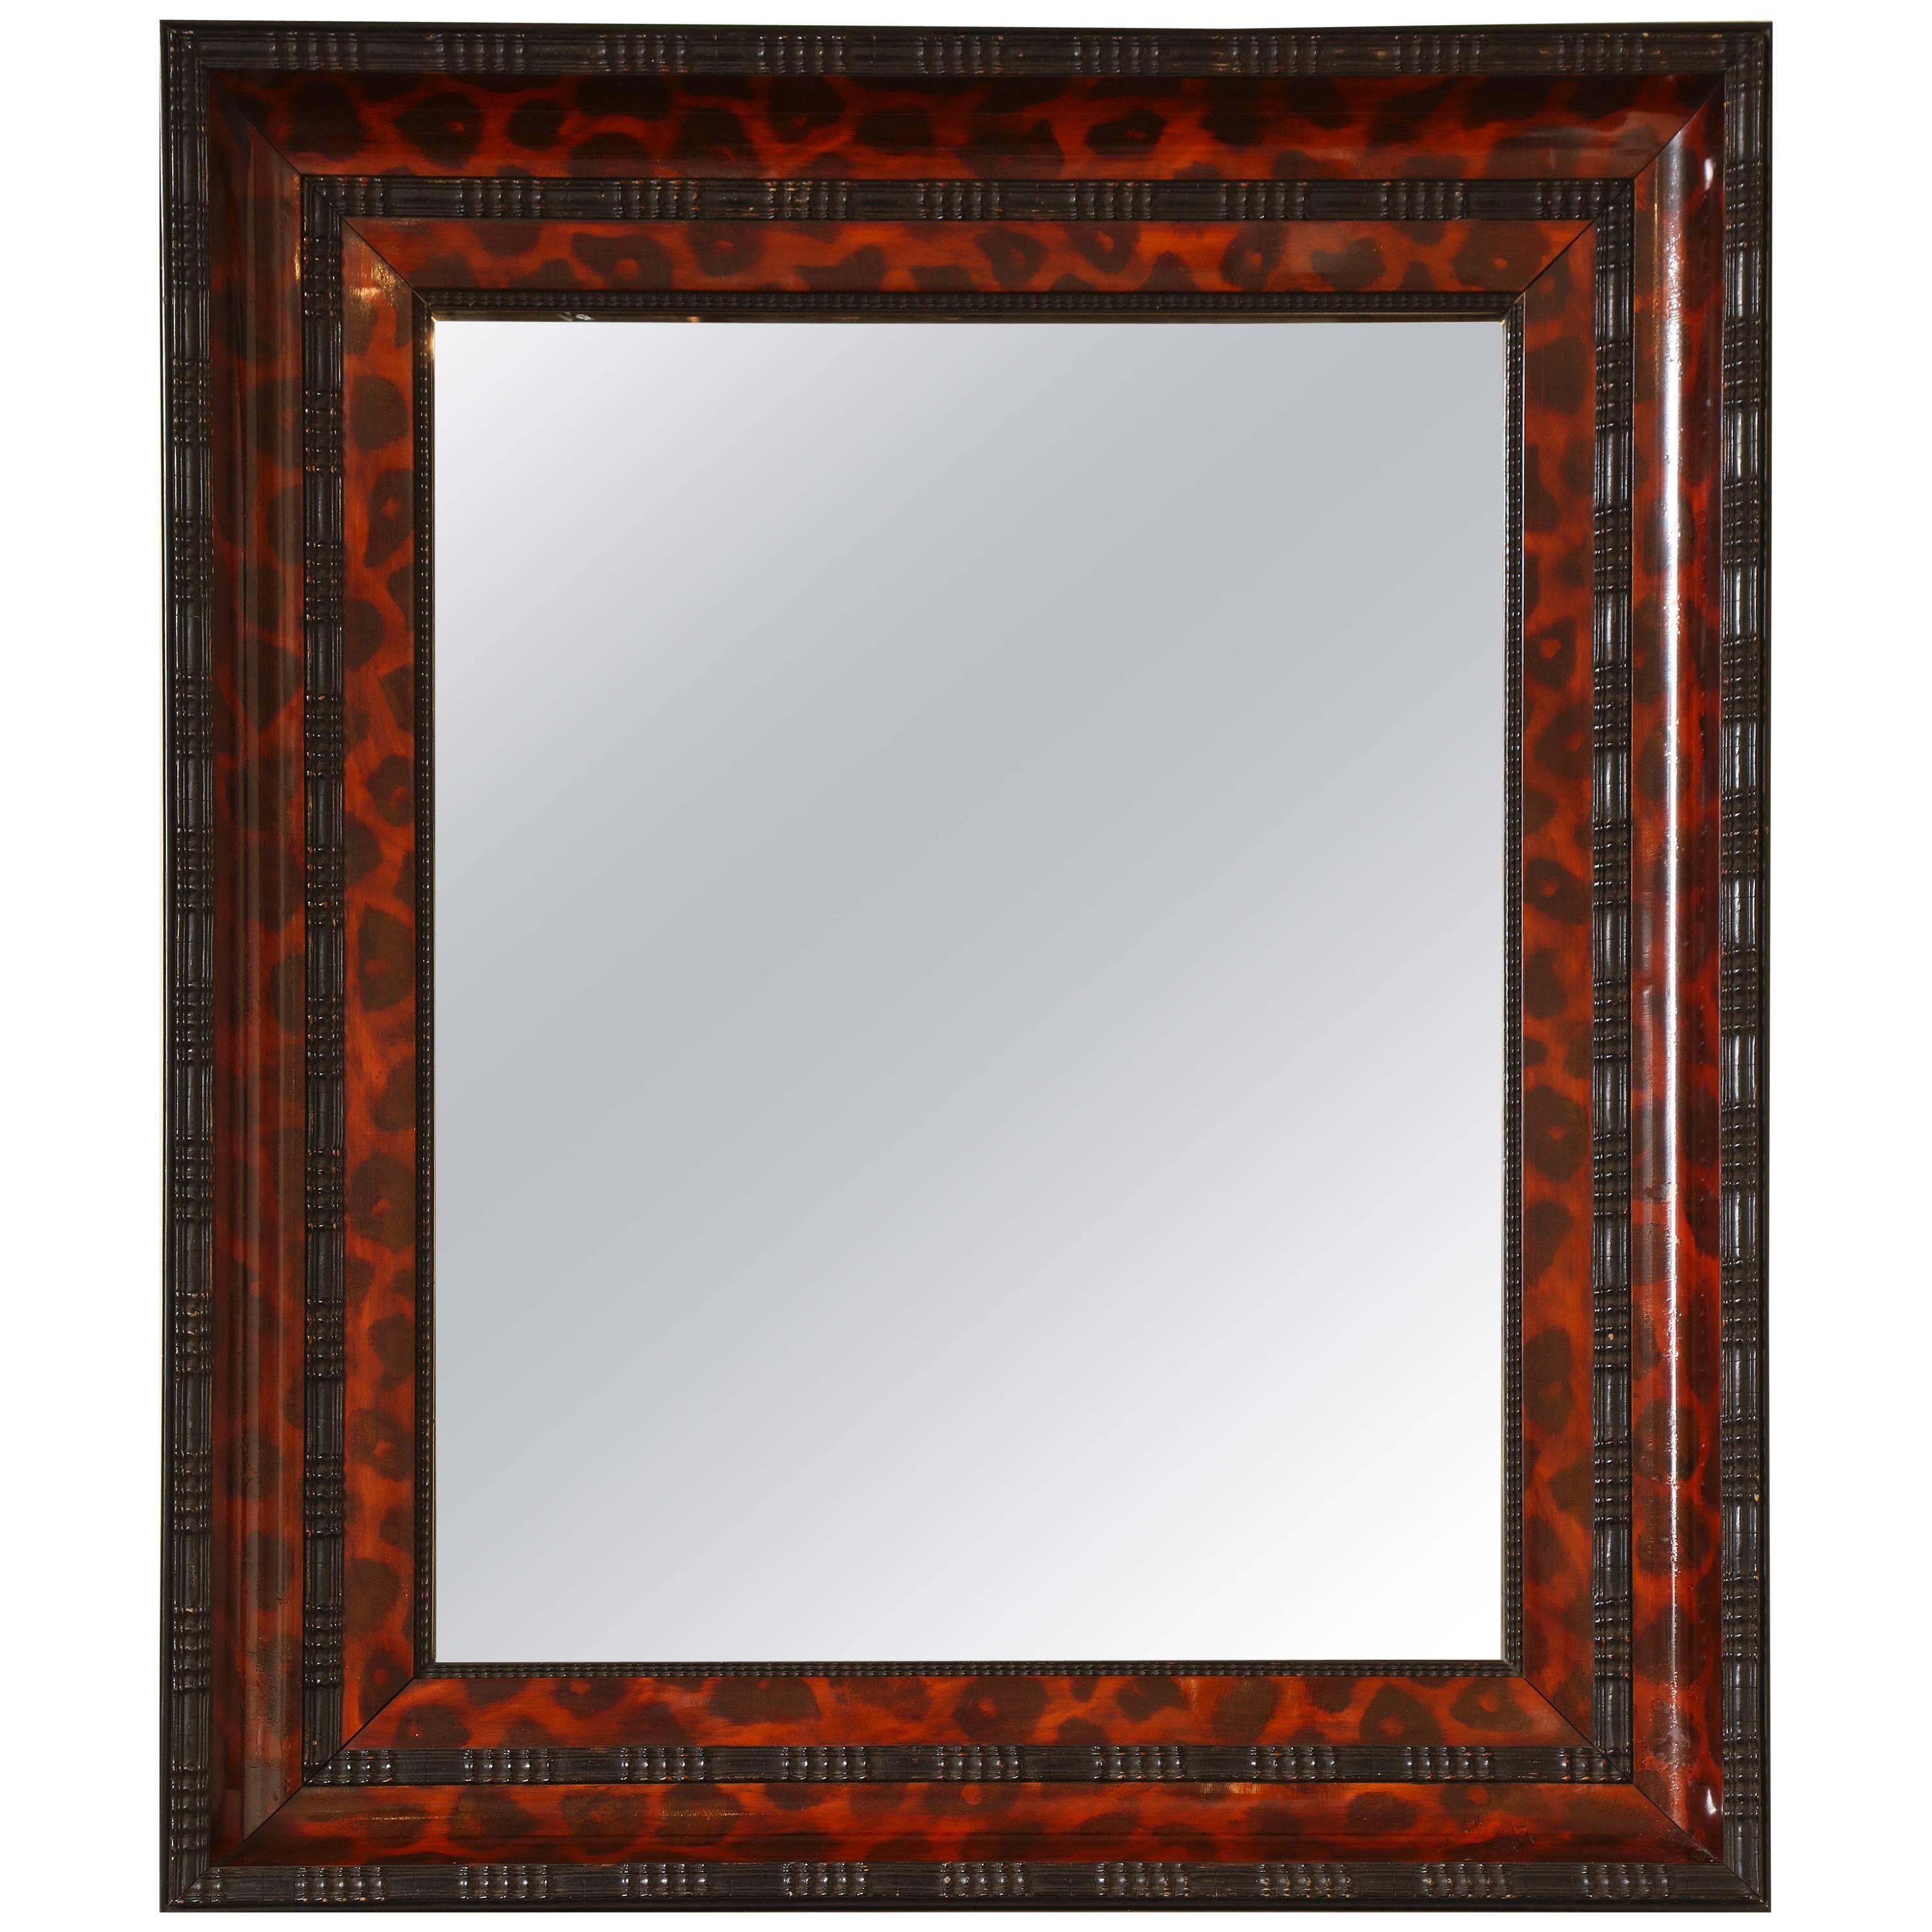 Ebonized and Lacquered Faux Tortoise Shell Decorated Mirror Frame